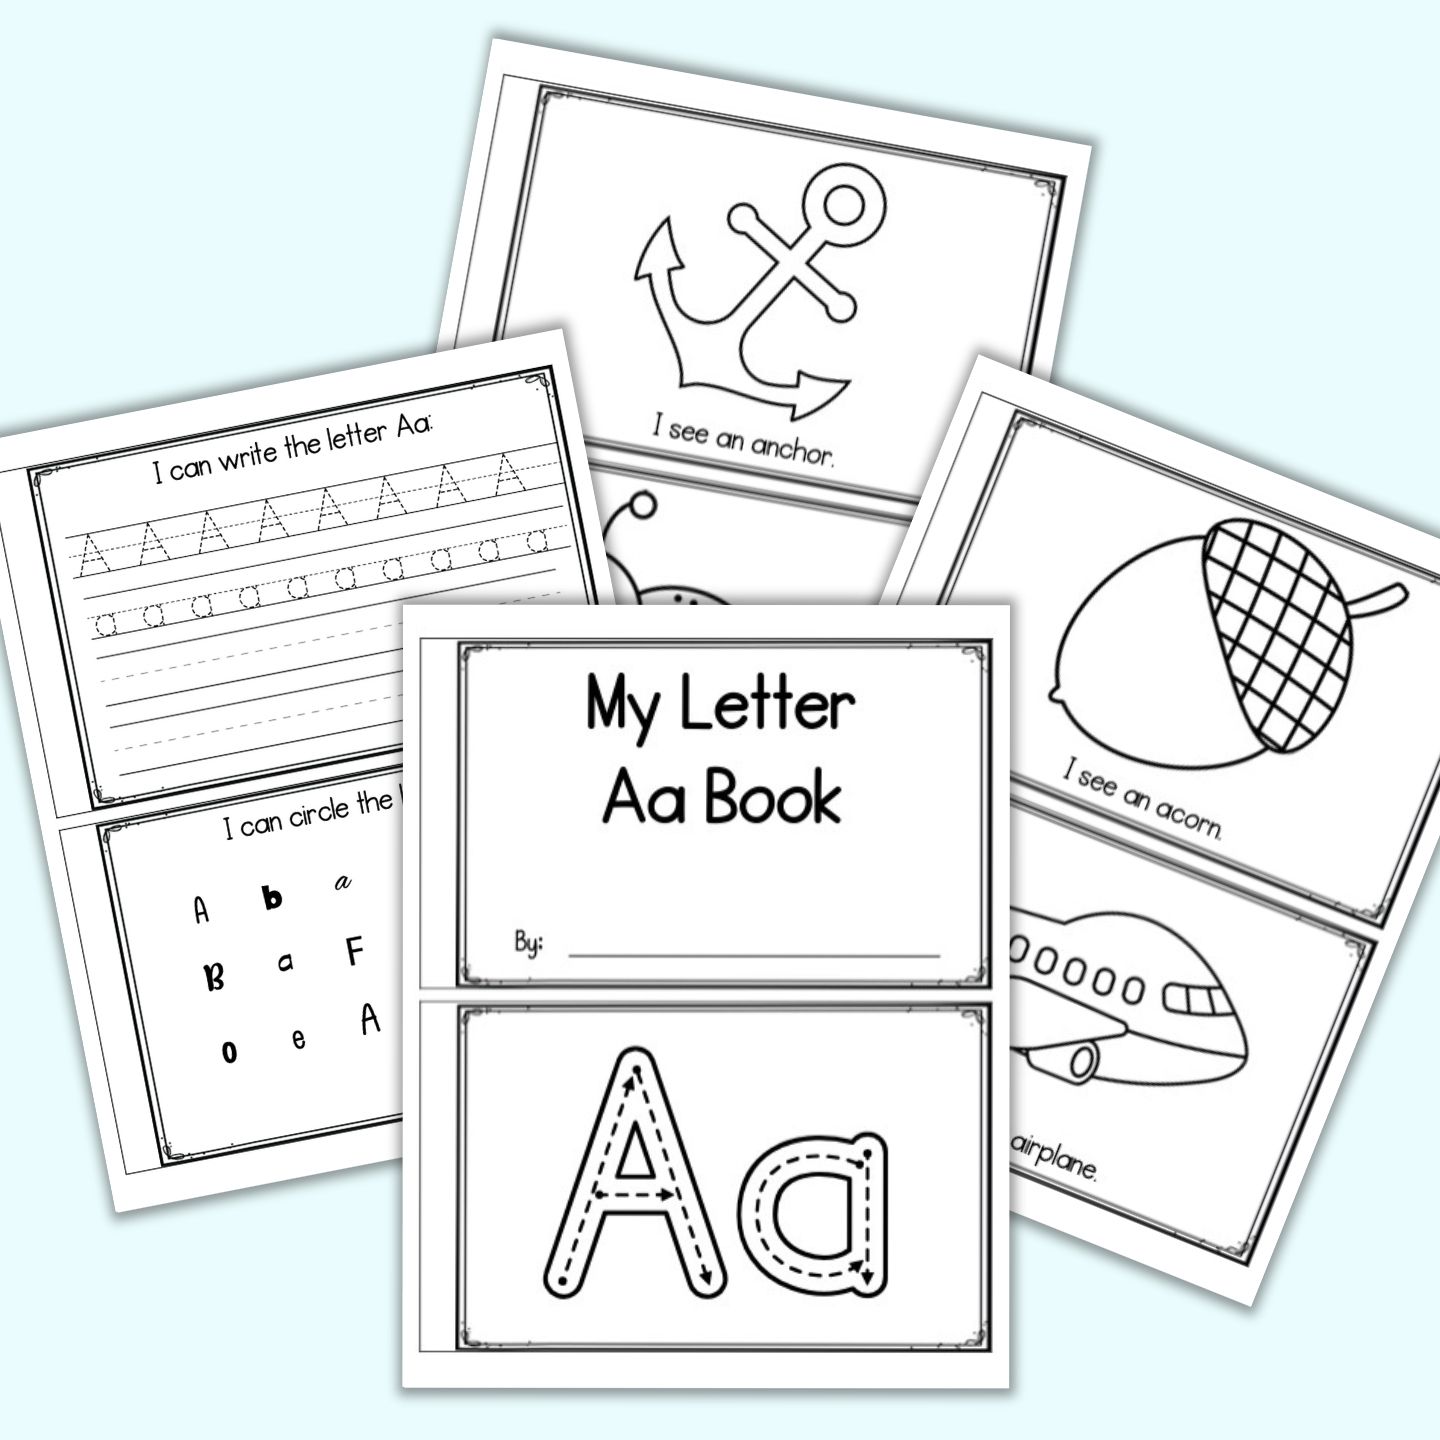 Free Printable Letter A Book Emergent Reader (for preschool pre k and